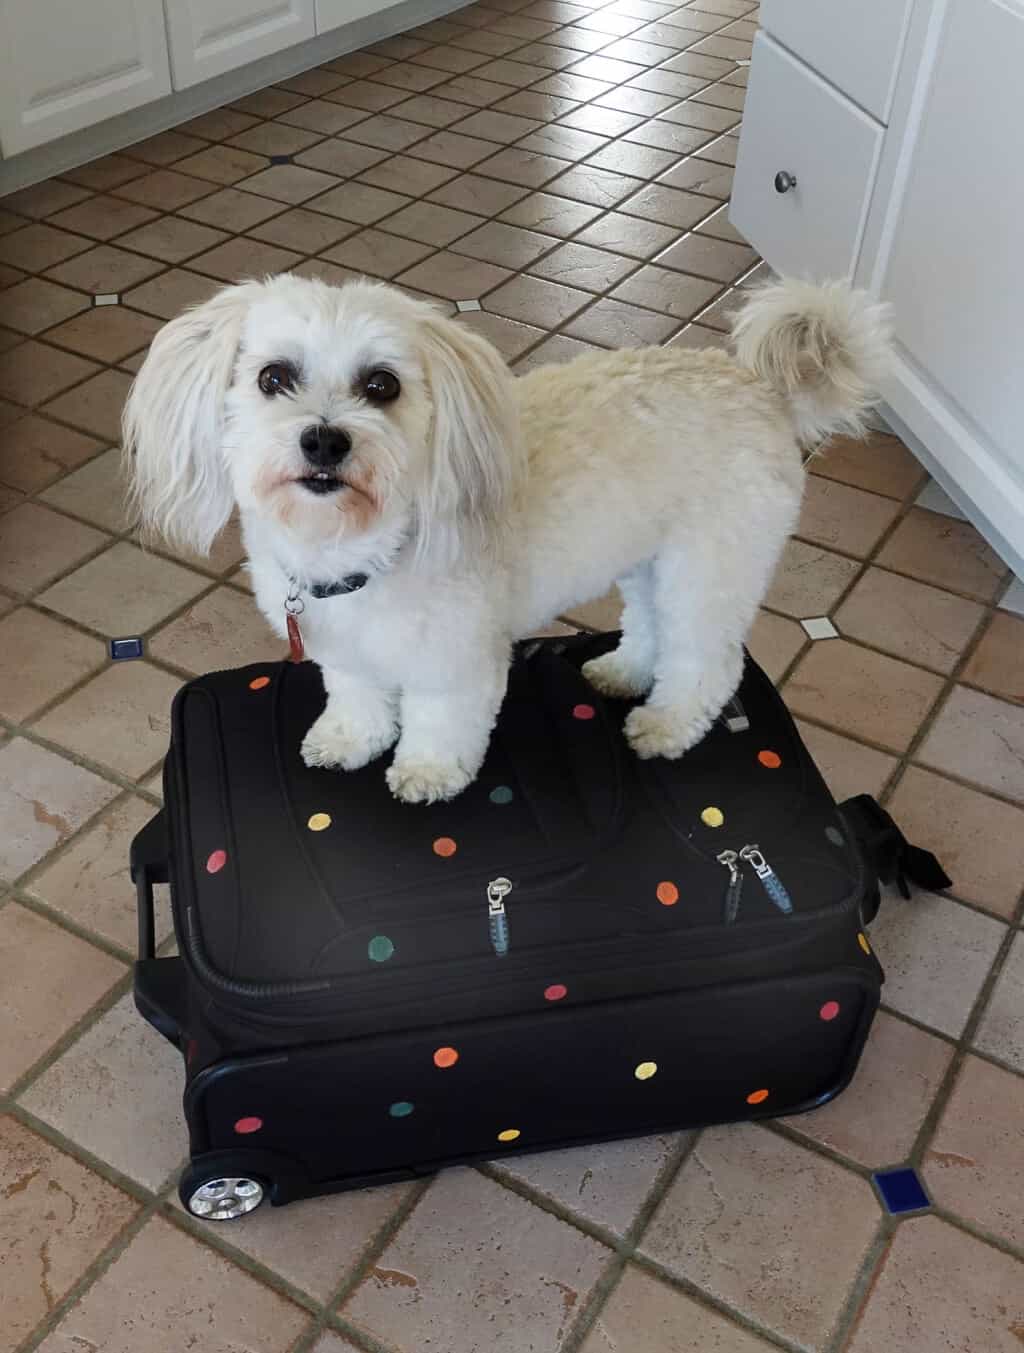 Robin Botie of Ithaca, New York, photographs her Havanese dog standing on top of her suitcase painted in a pre-travel leaving home ritual.